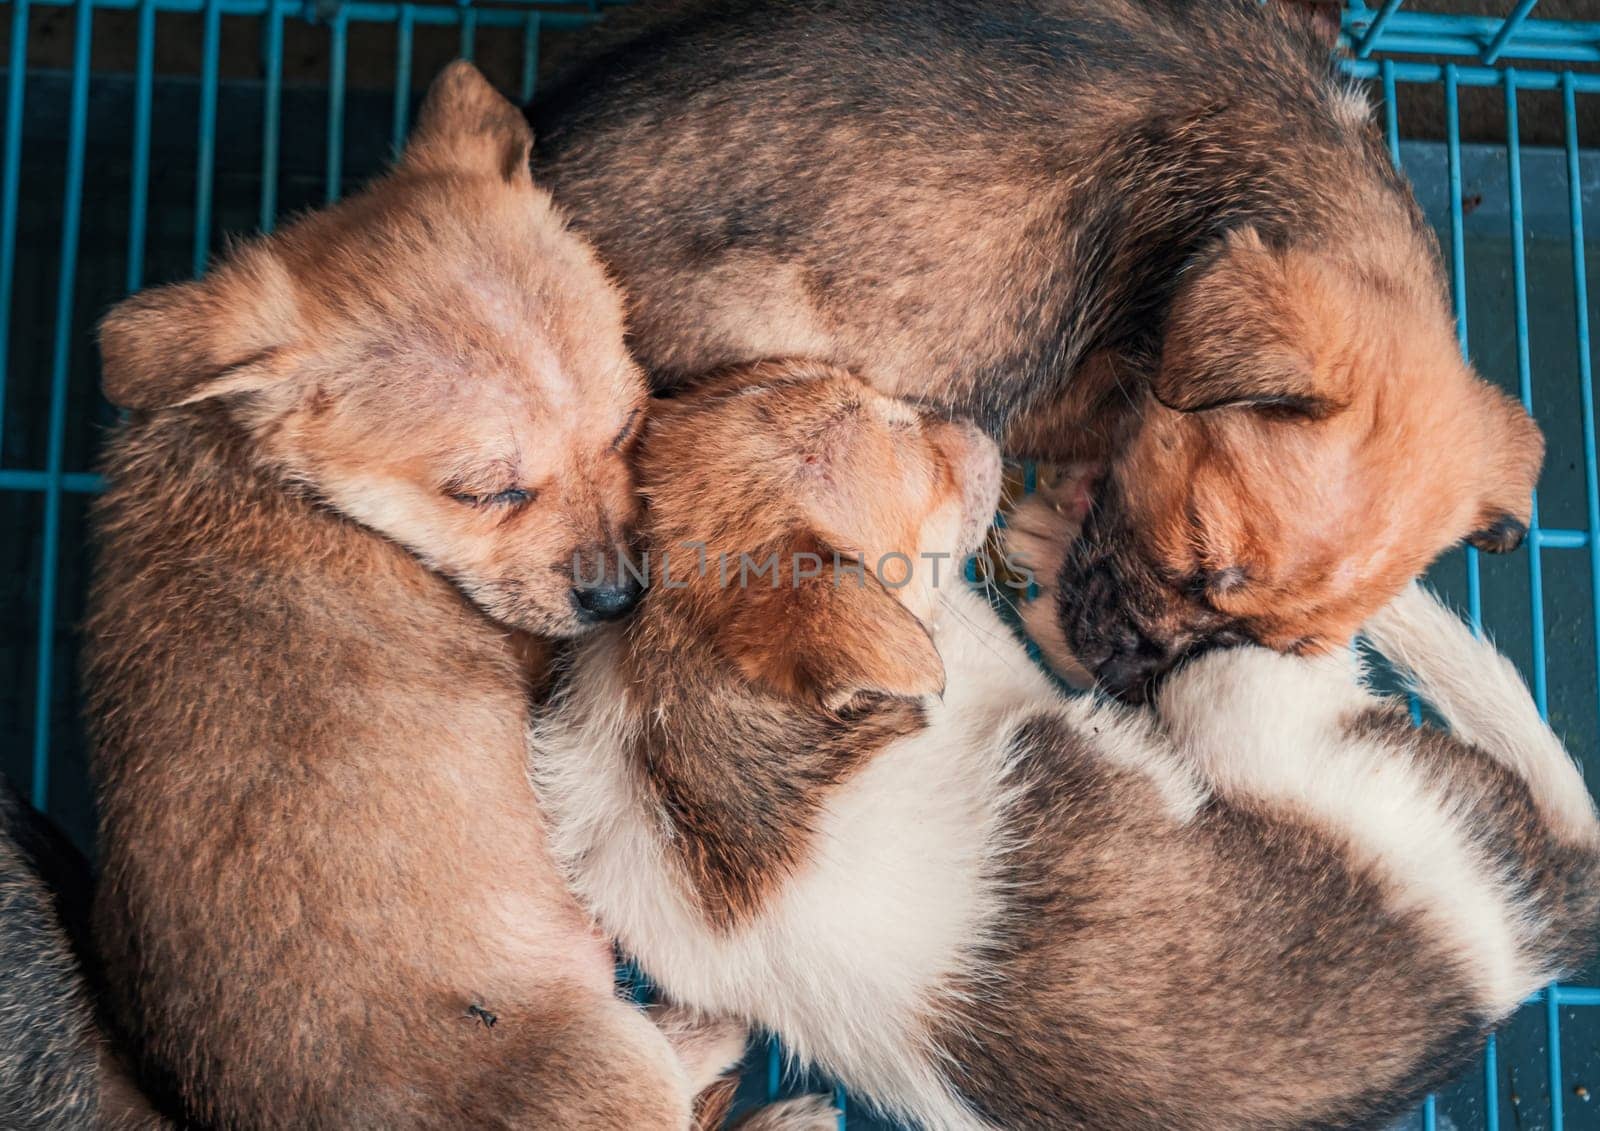 Close-up of sleeping puppies in shelter behind fence waiting to be rescued and adopted to new home. Shelter for animals concept by Busker